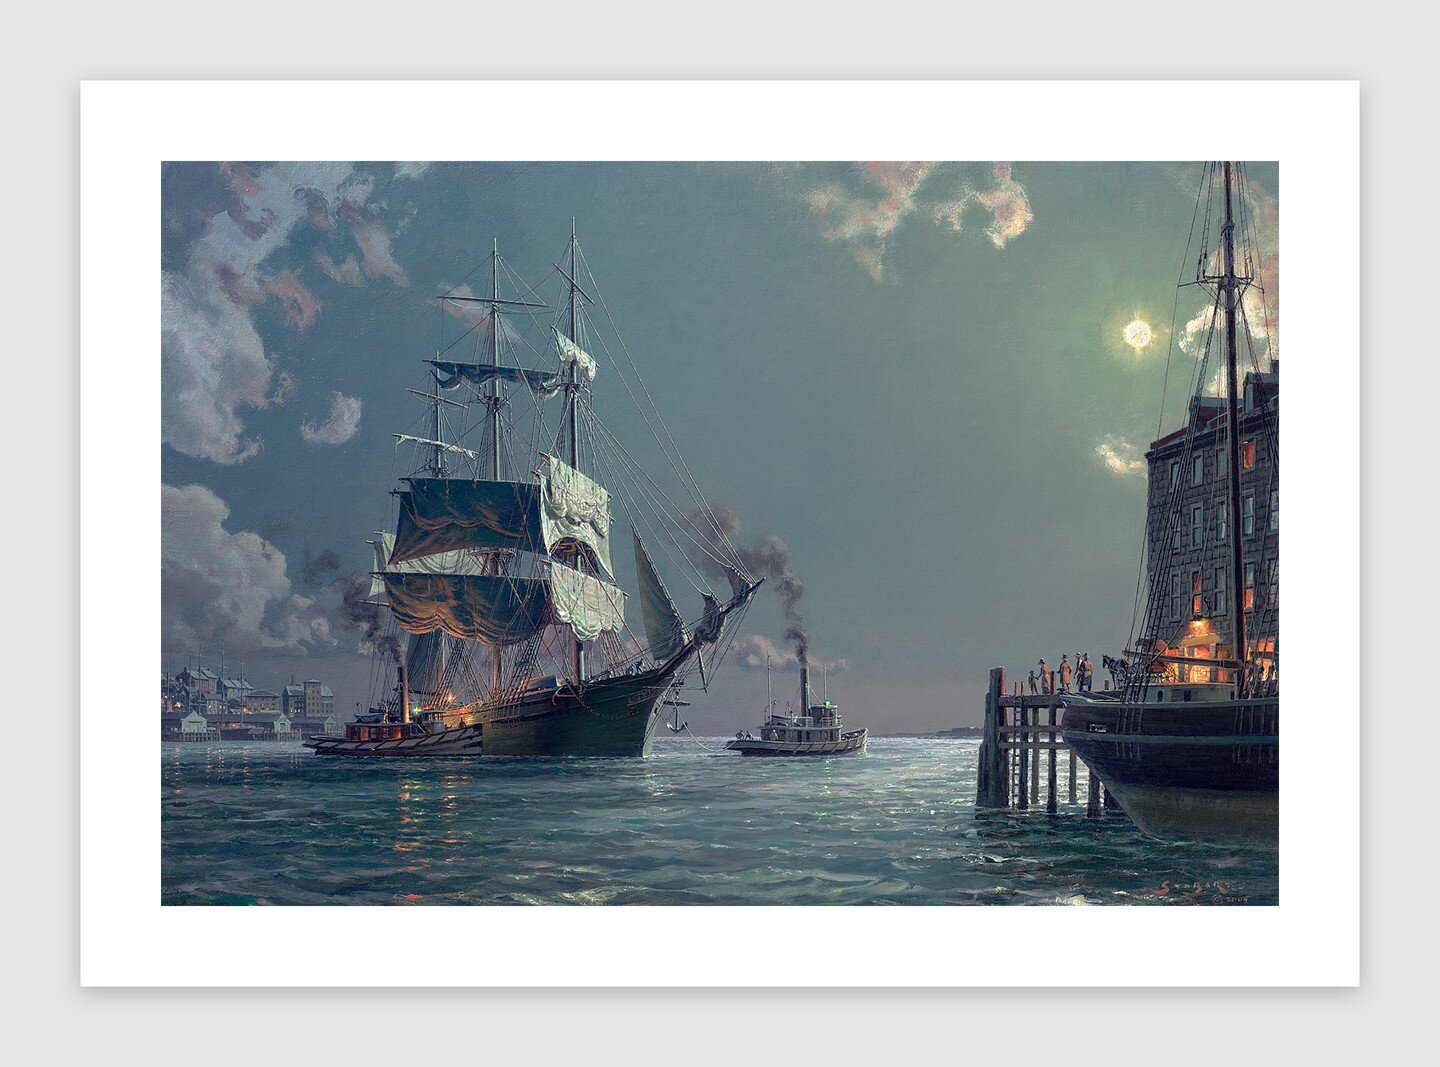 Boston Departure by John Stobart

It is late evening in Boston Harbor at the zenith of the Clipper Era. A few well-wishers and family members have remained at the wharf to witness the event as the ship leaves the pier in the custody of pilot and tugs